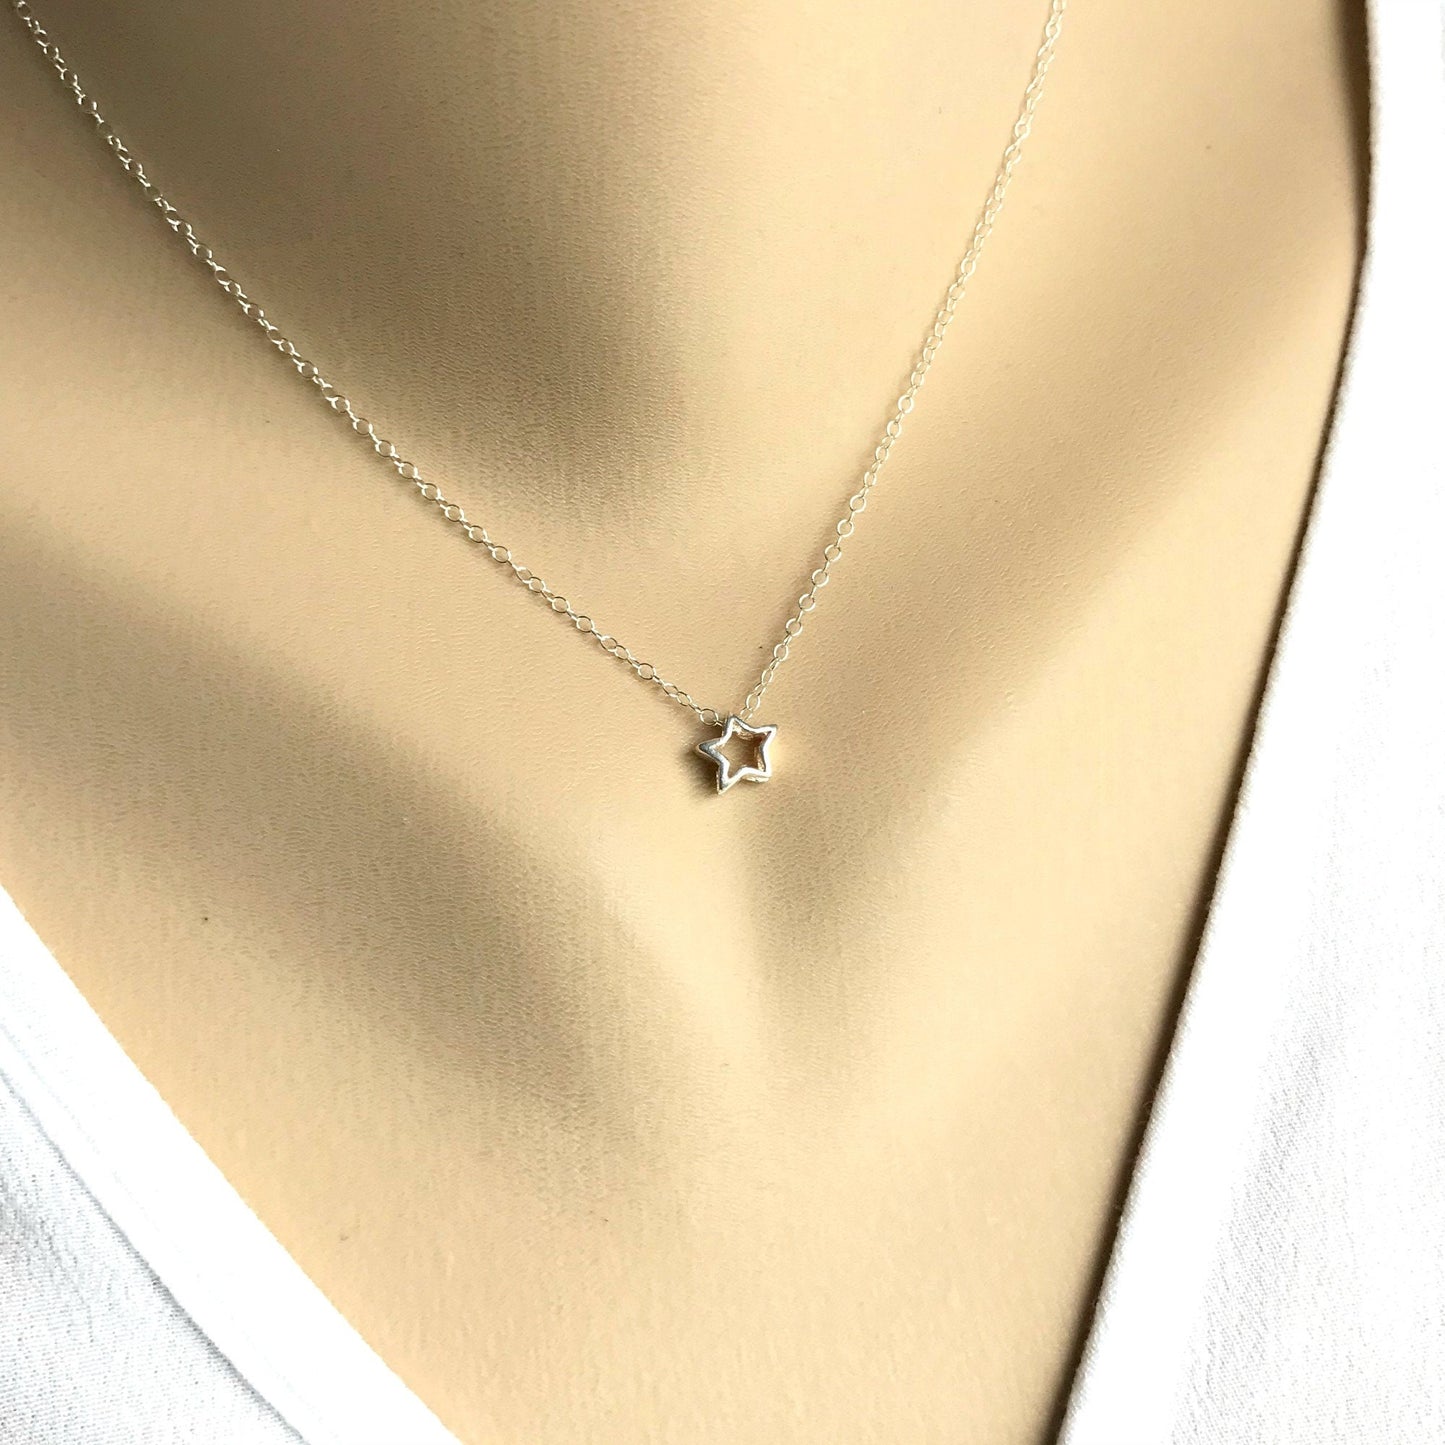 Star Necklace Silver Star Charm Everyday Jewelry Celestial Jewelry Dainty Necklace Layered Necklace Minimalist Necklace Gift for best Friend